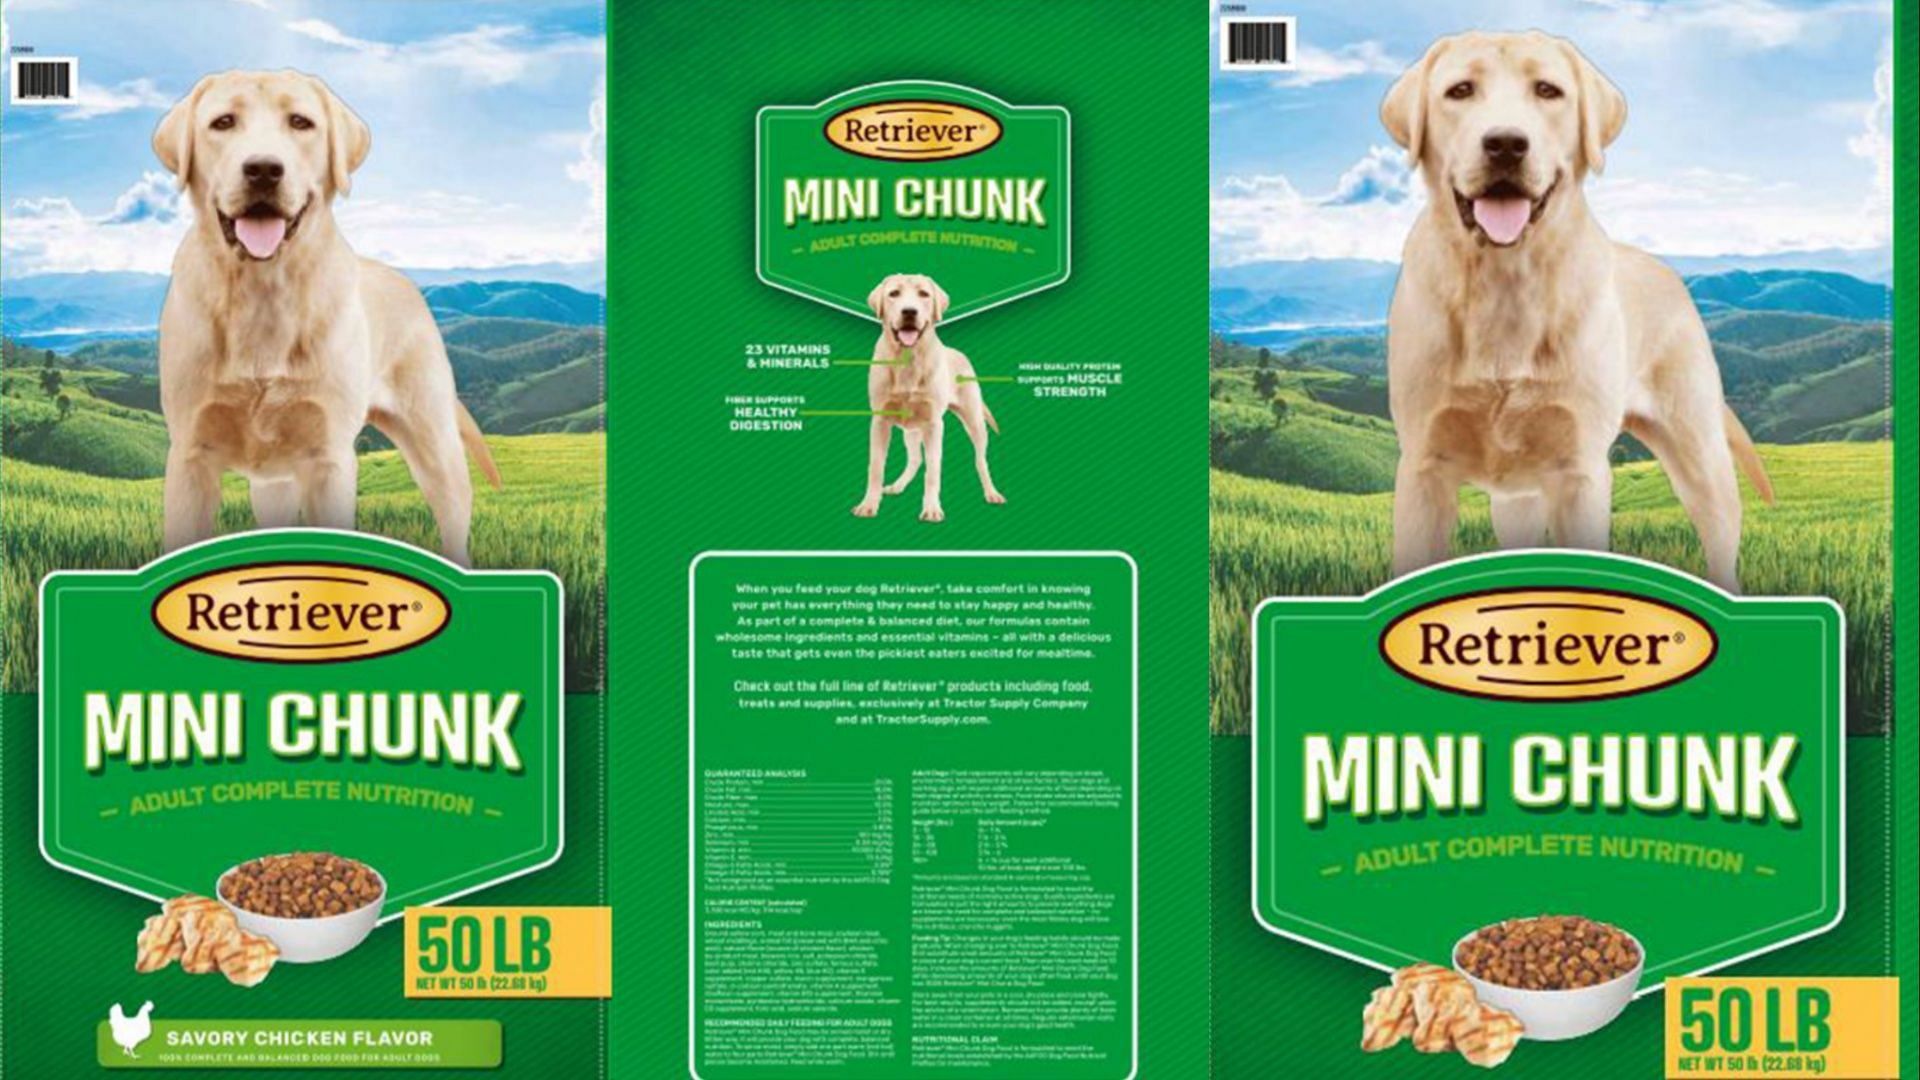 The recalled Retriever Dry Dog Food products should not be given to pets (Image via FDA)